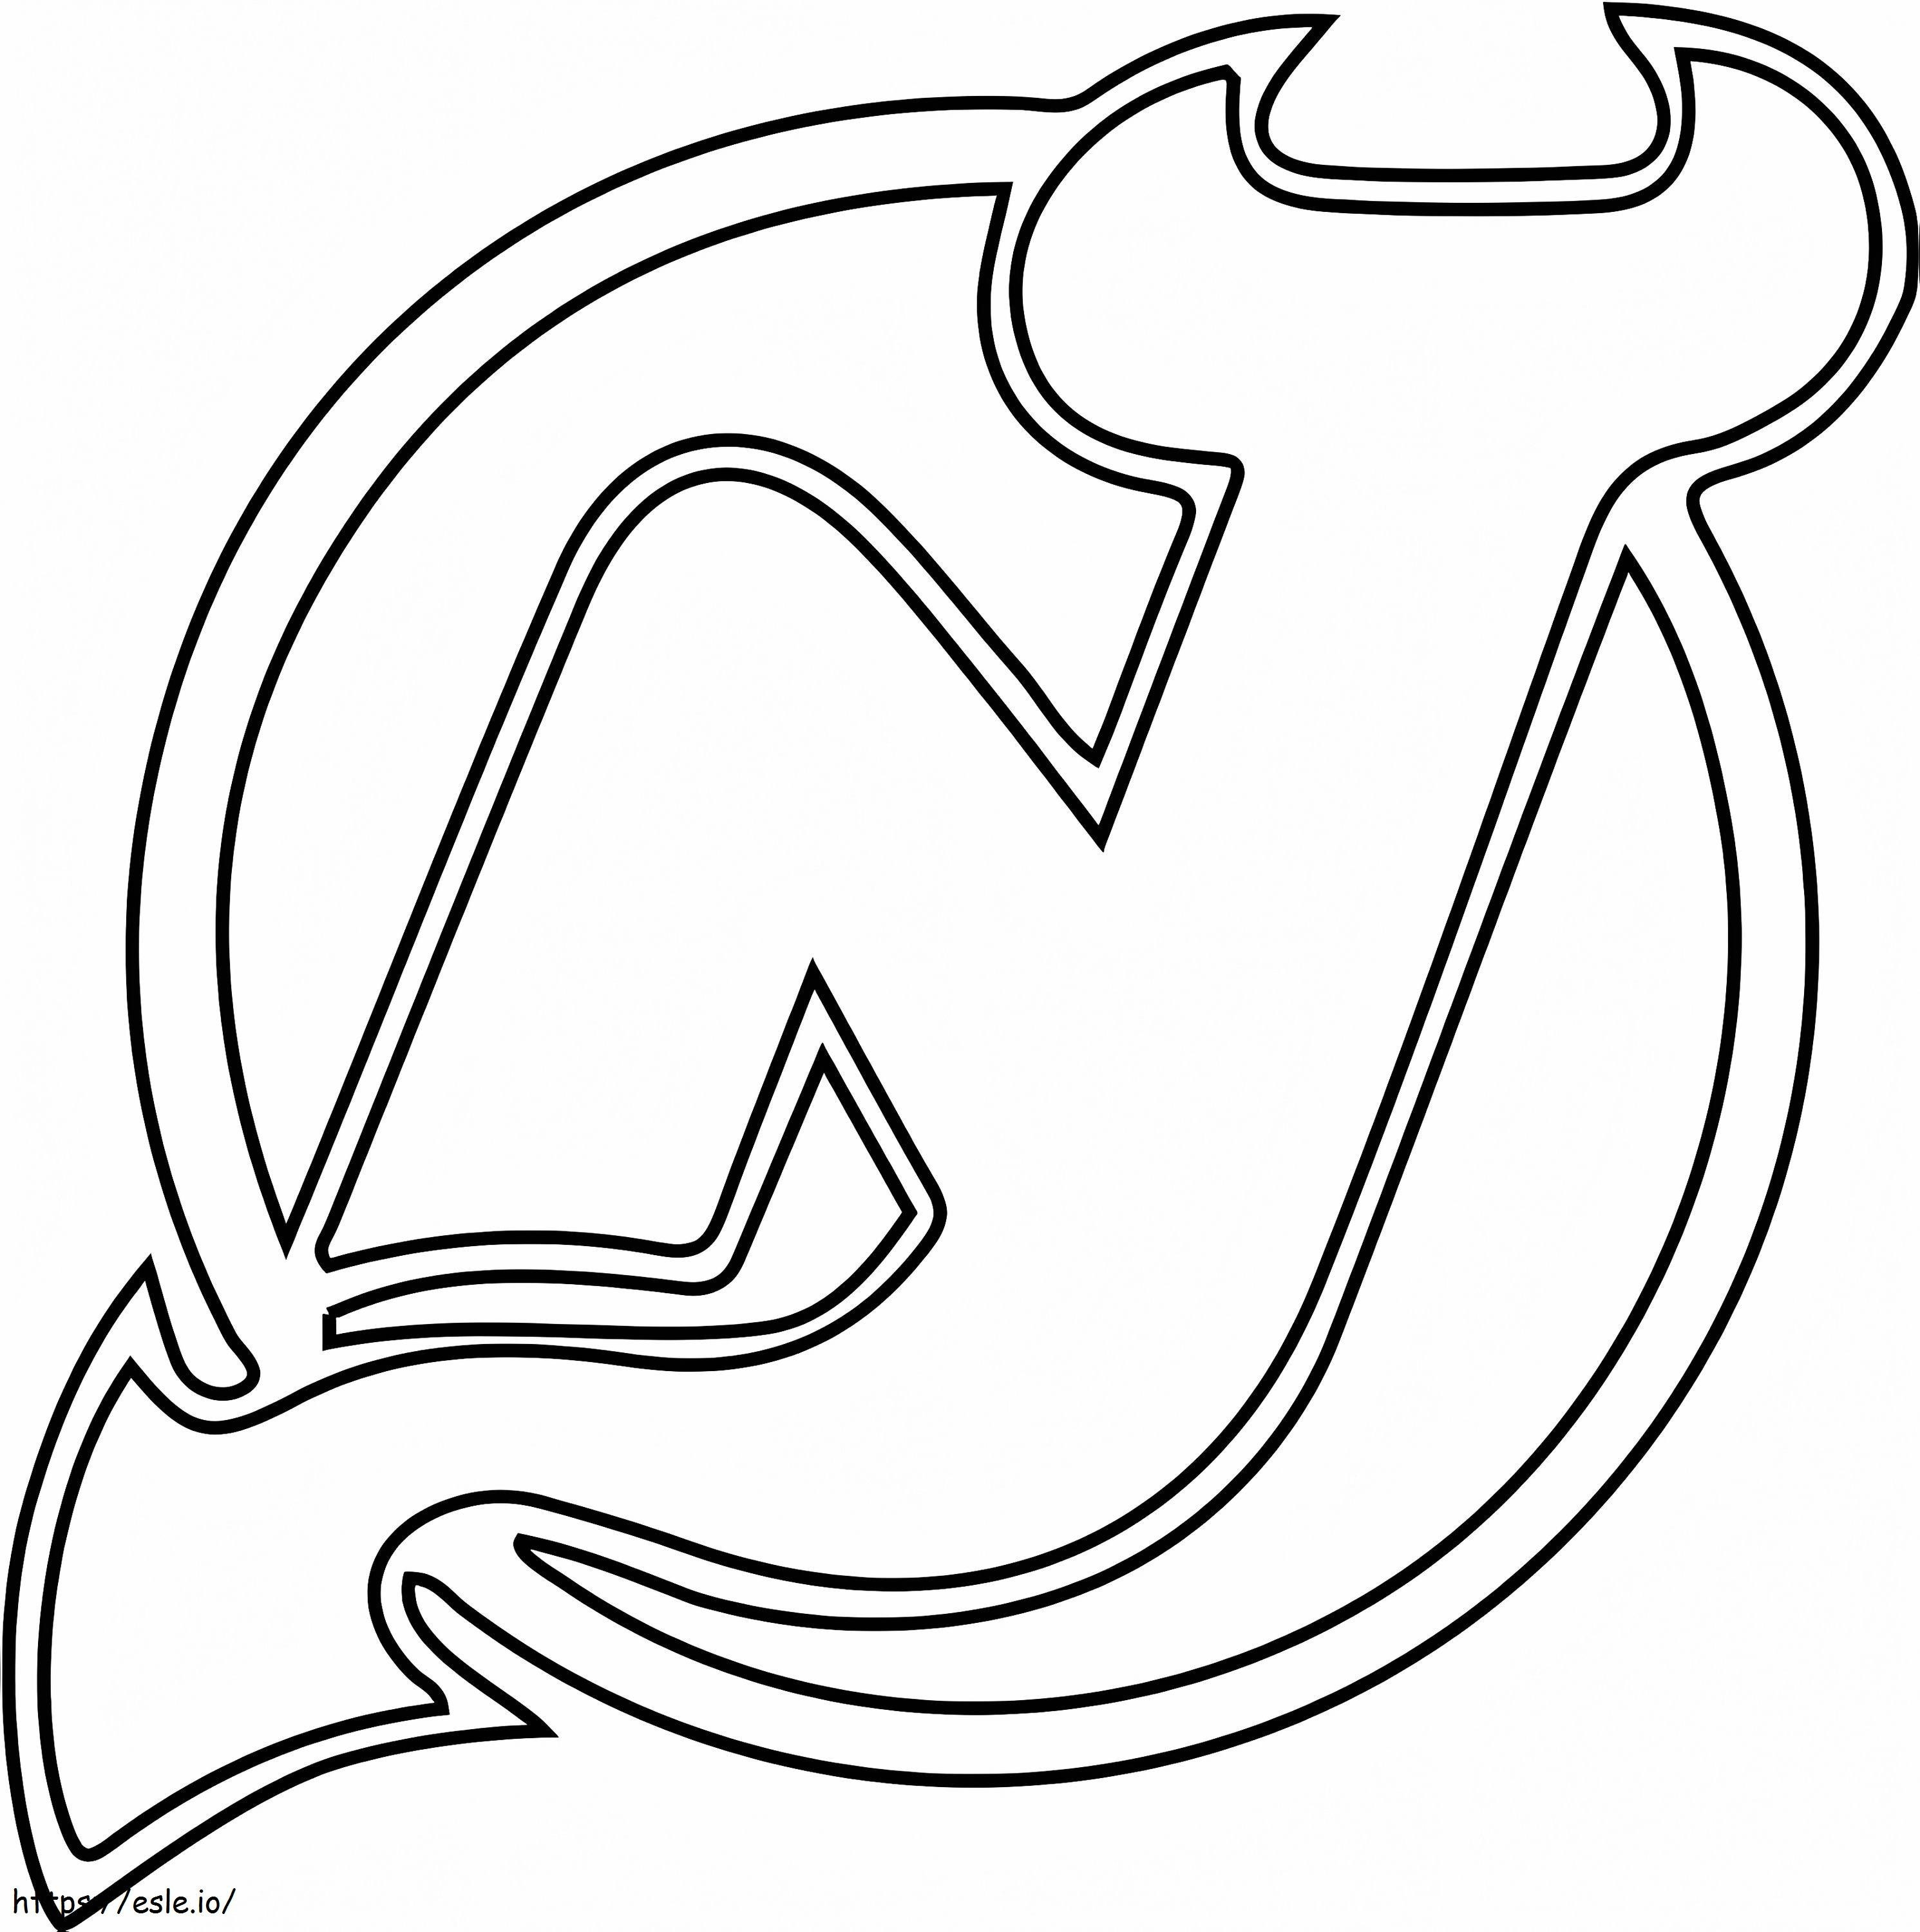 New Jersey Devils Logo coloring page